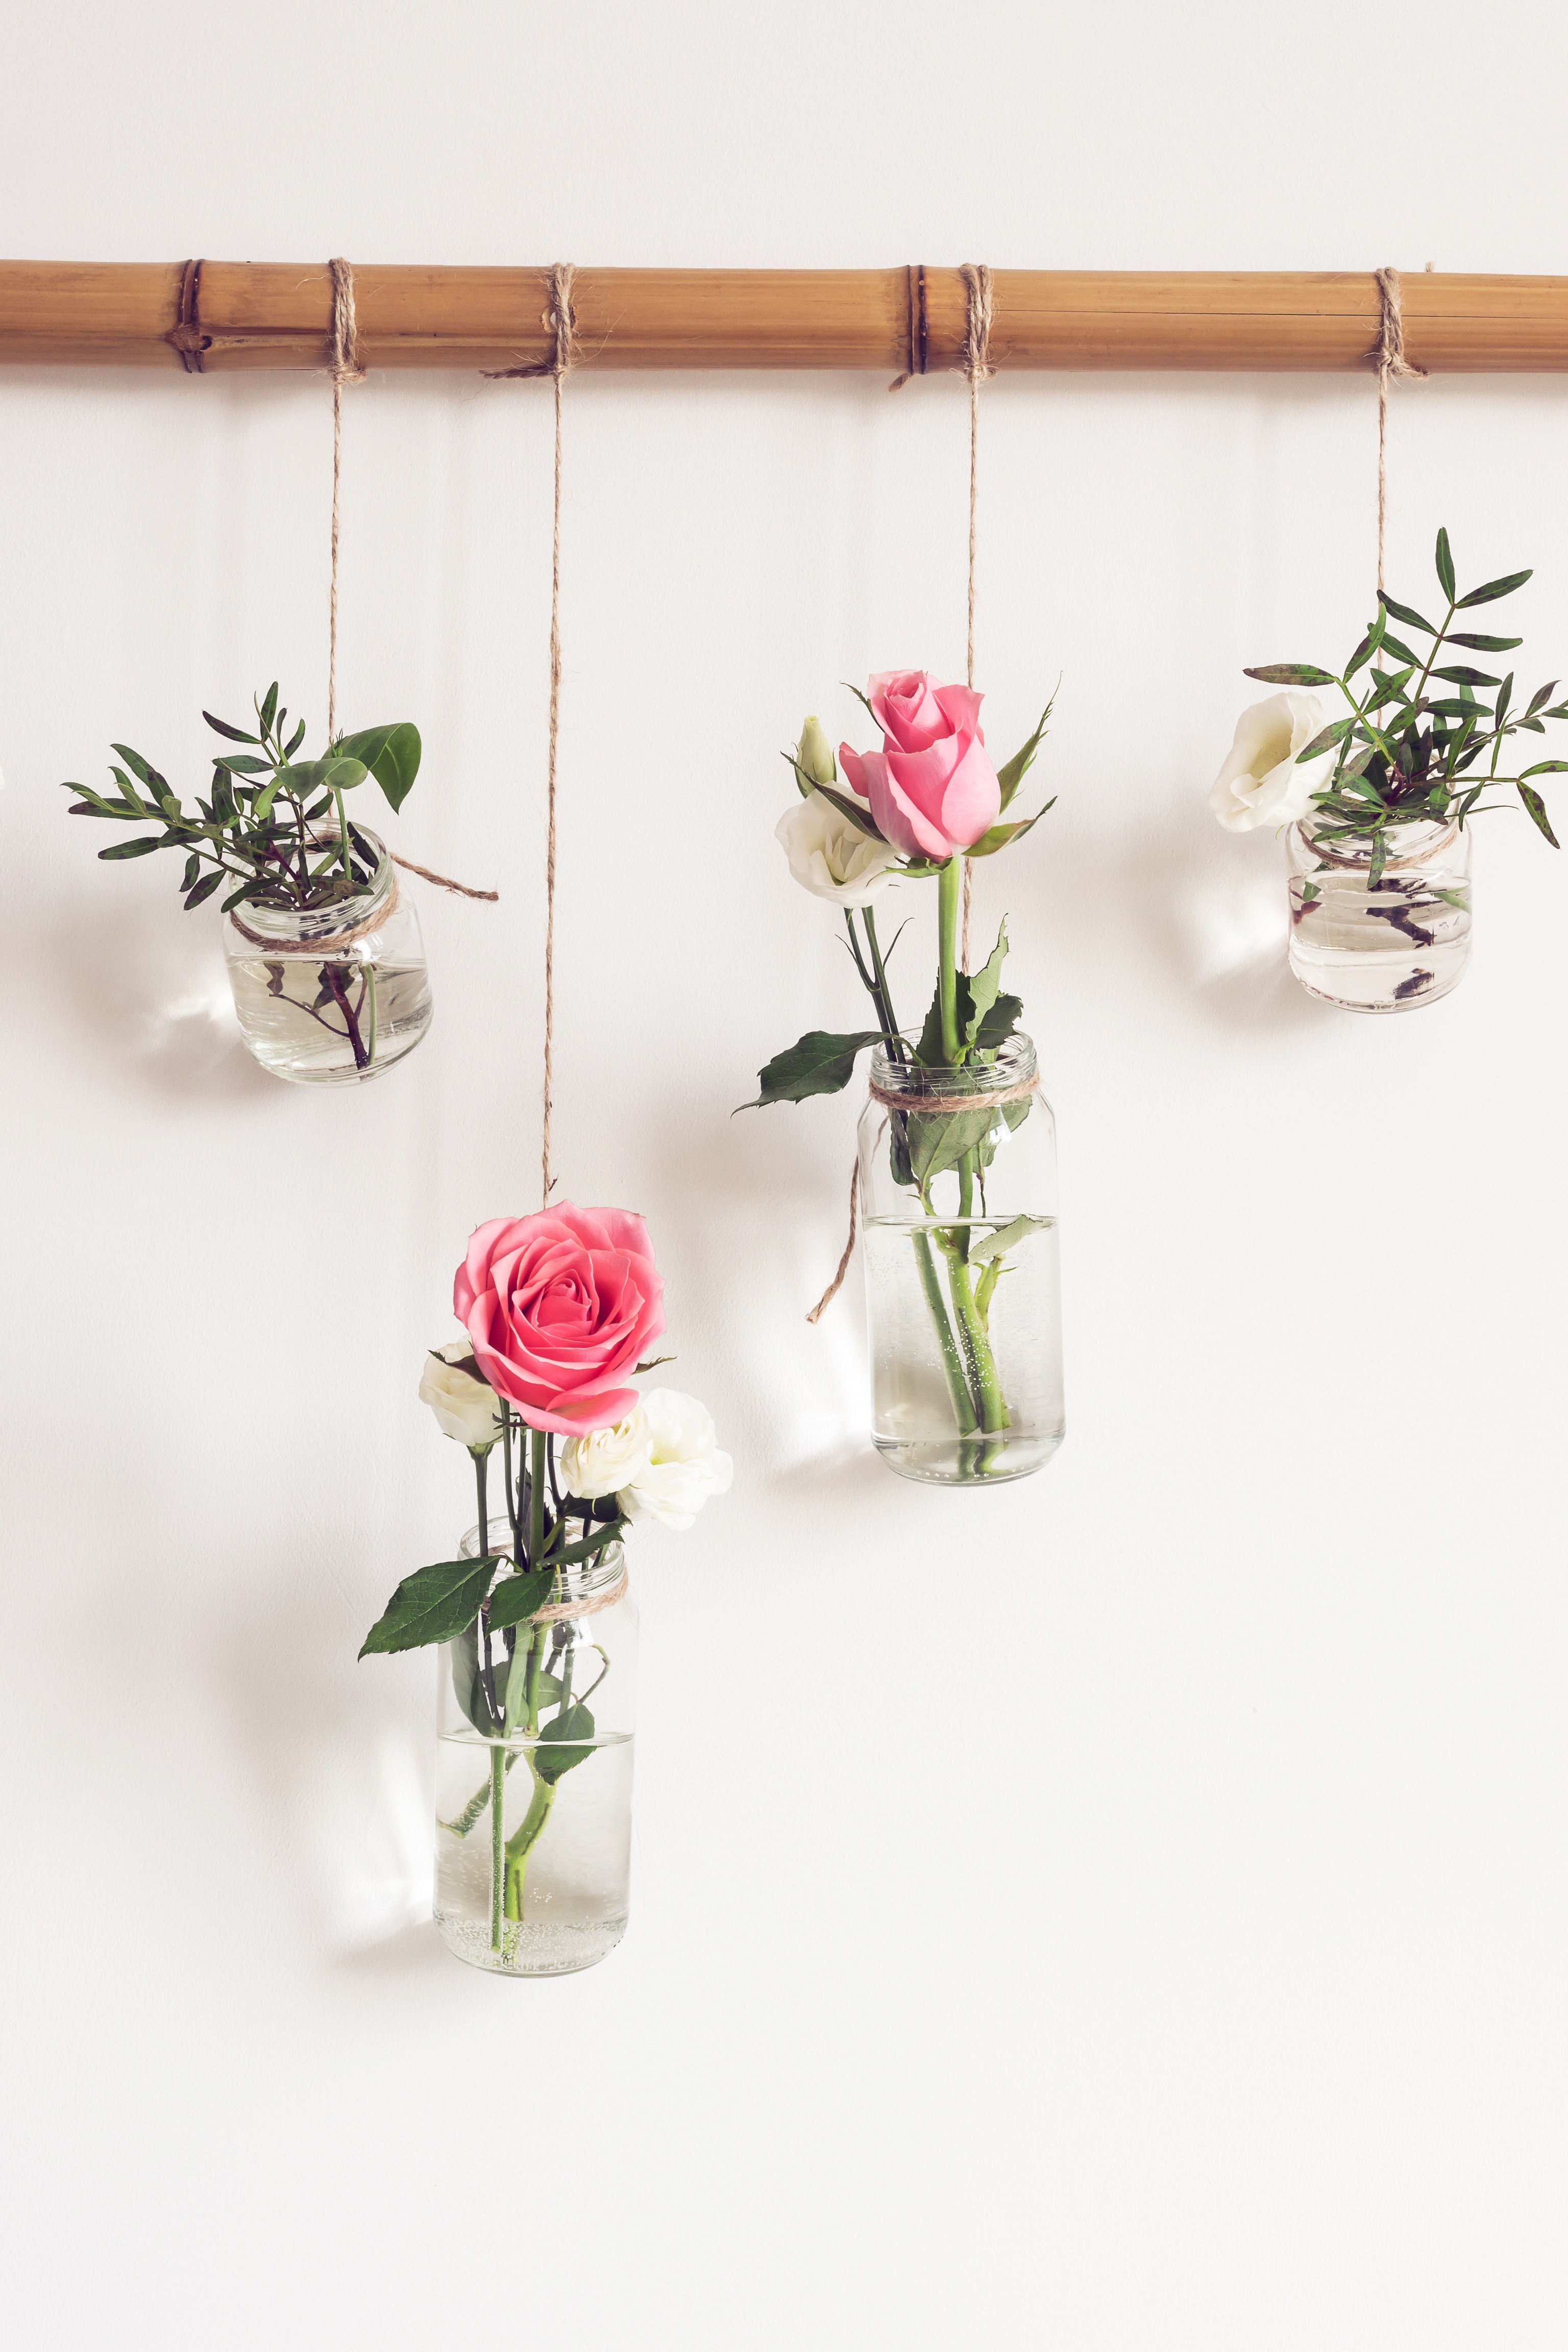 Glass jars are reused as hanging vases